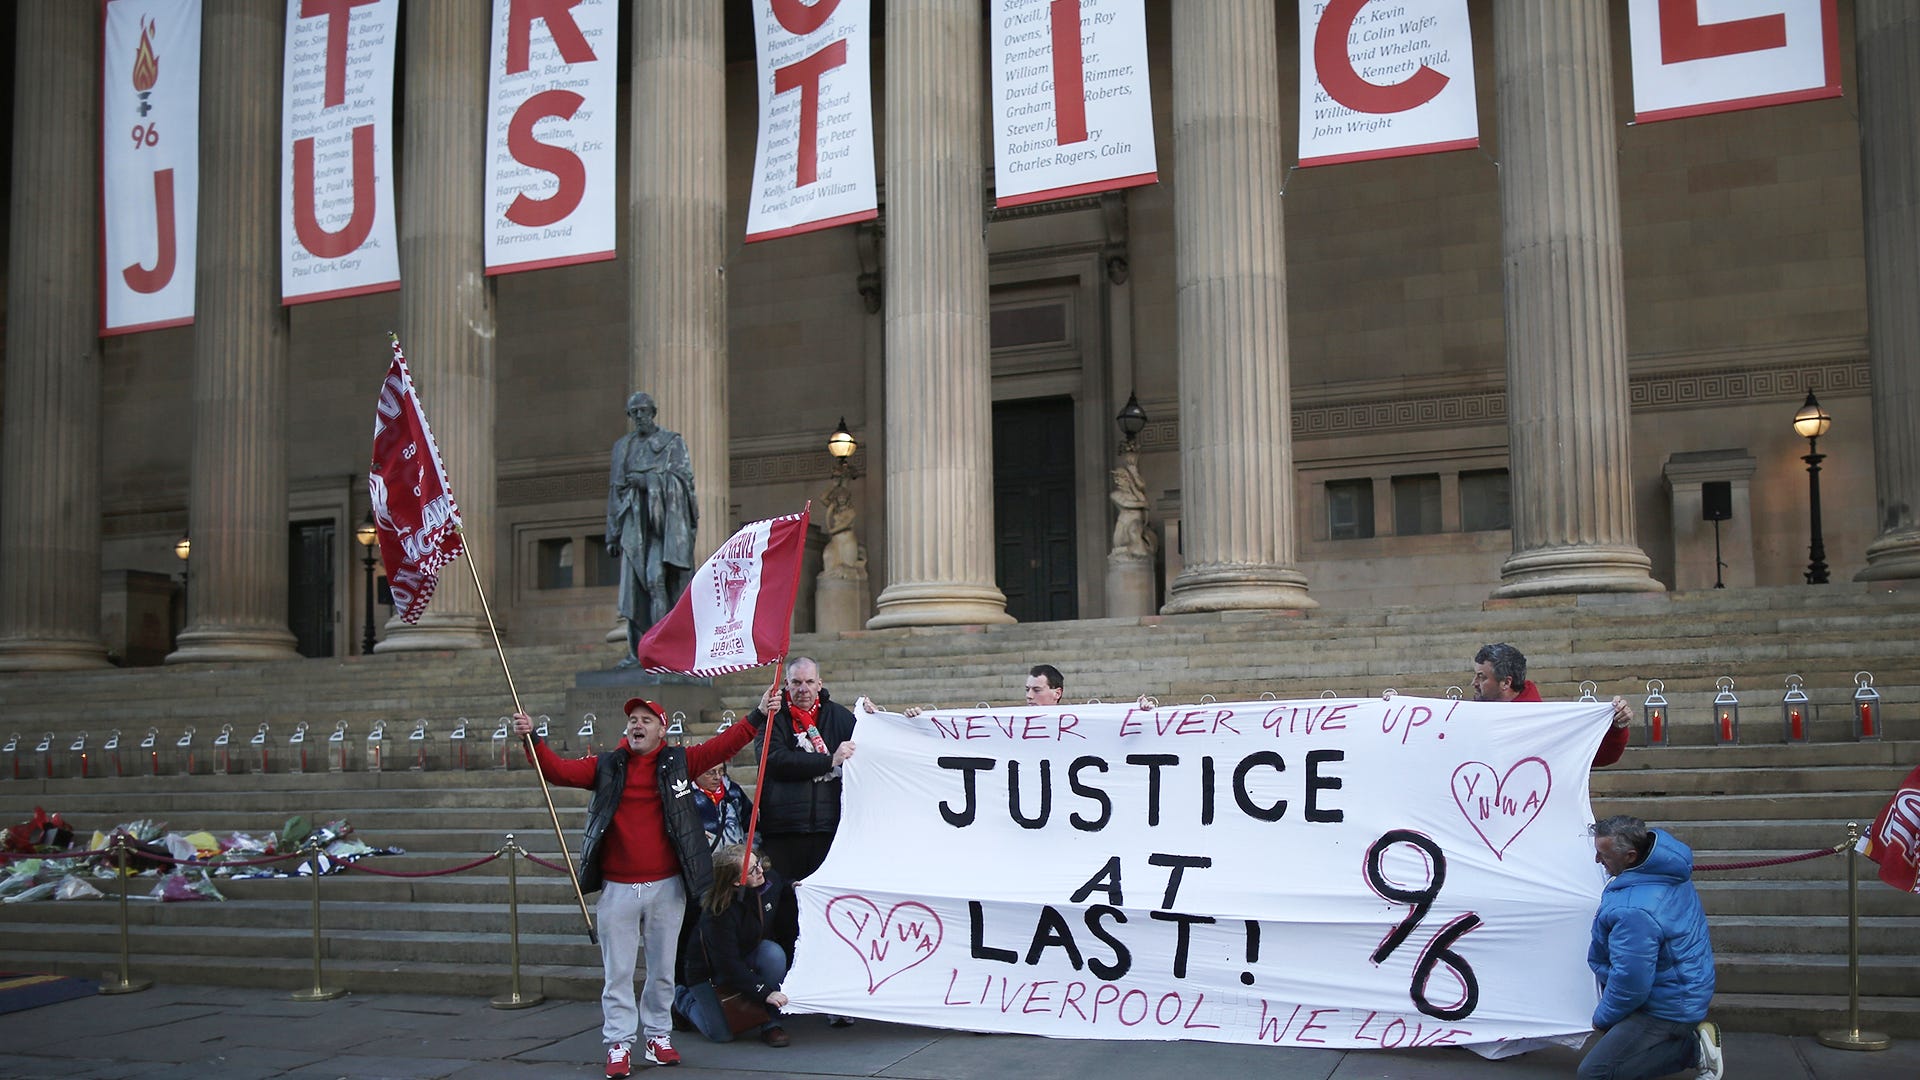 Liverpool justice for 96